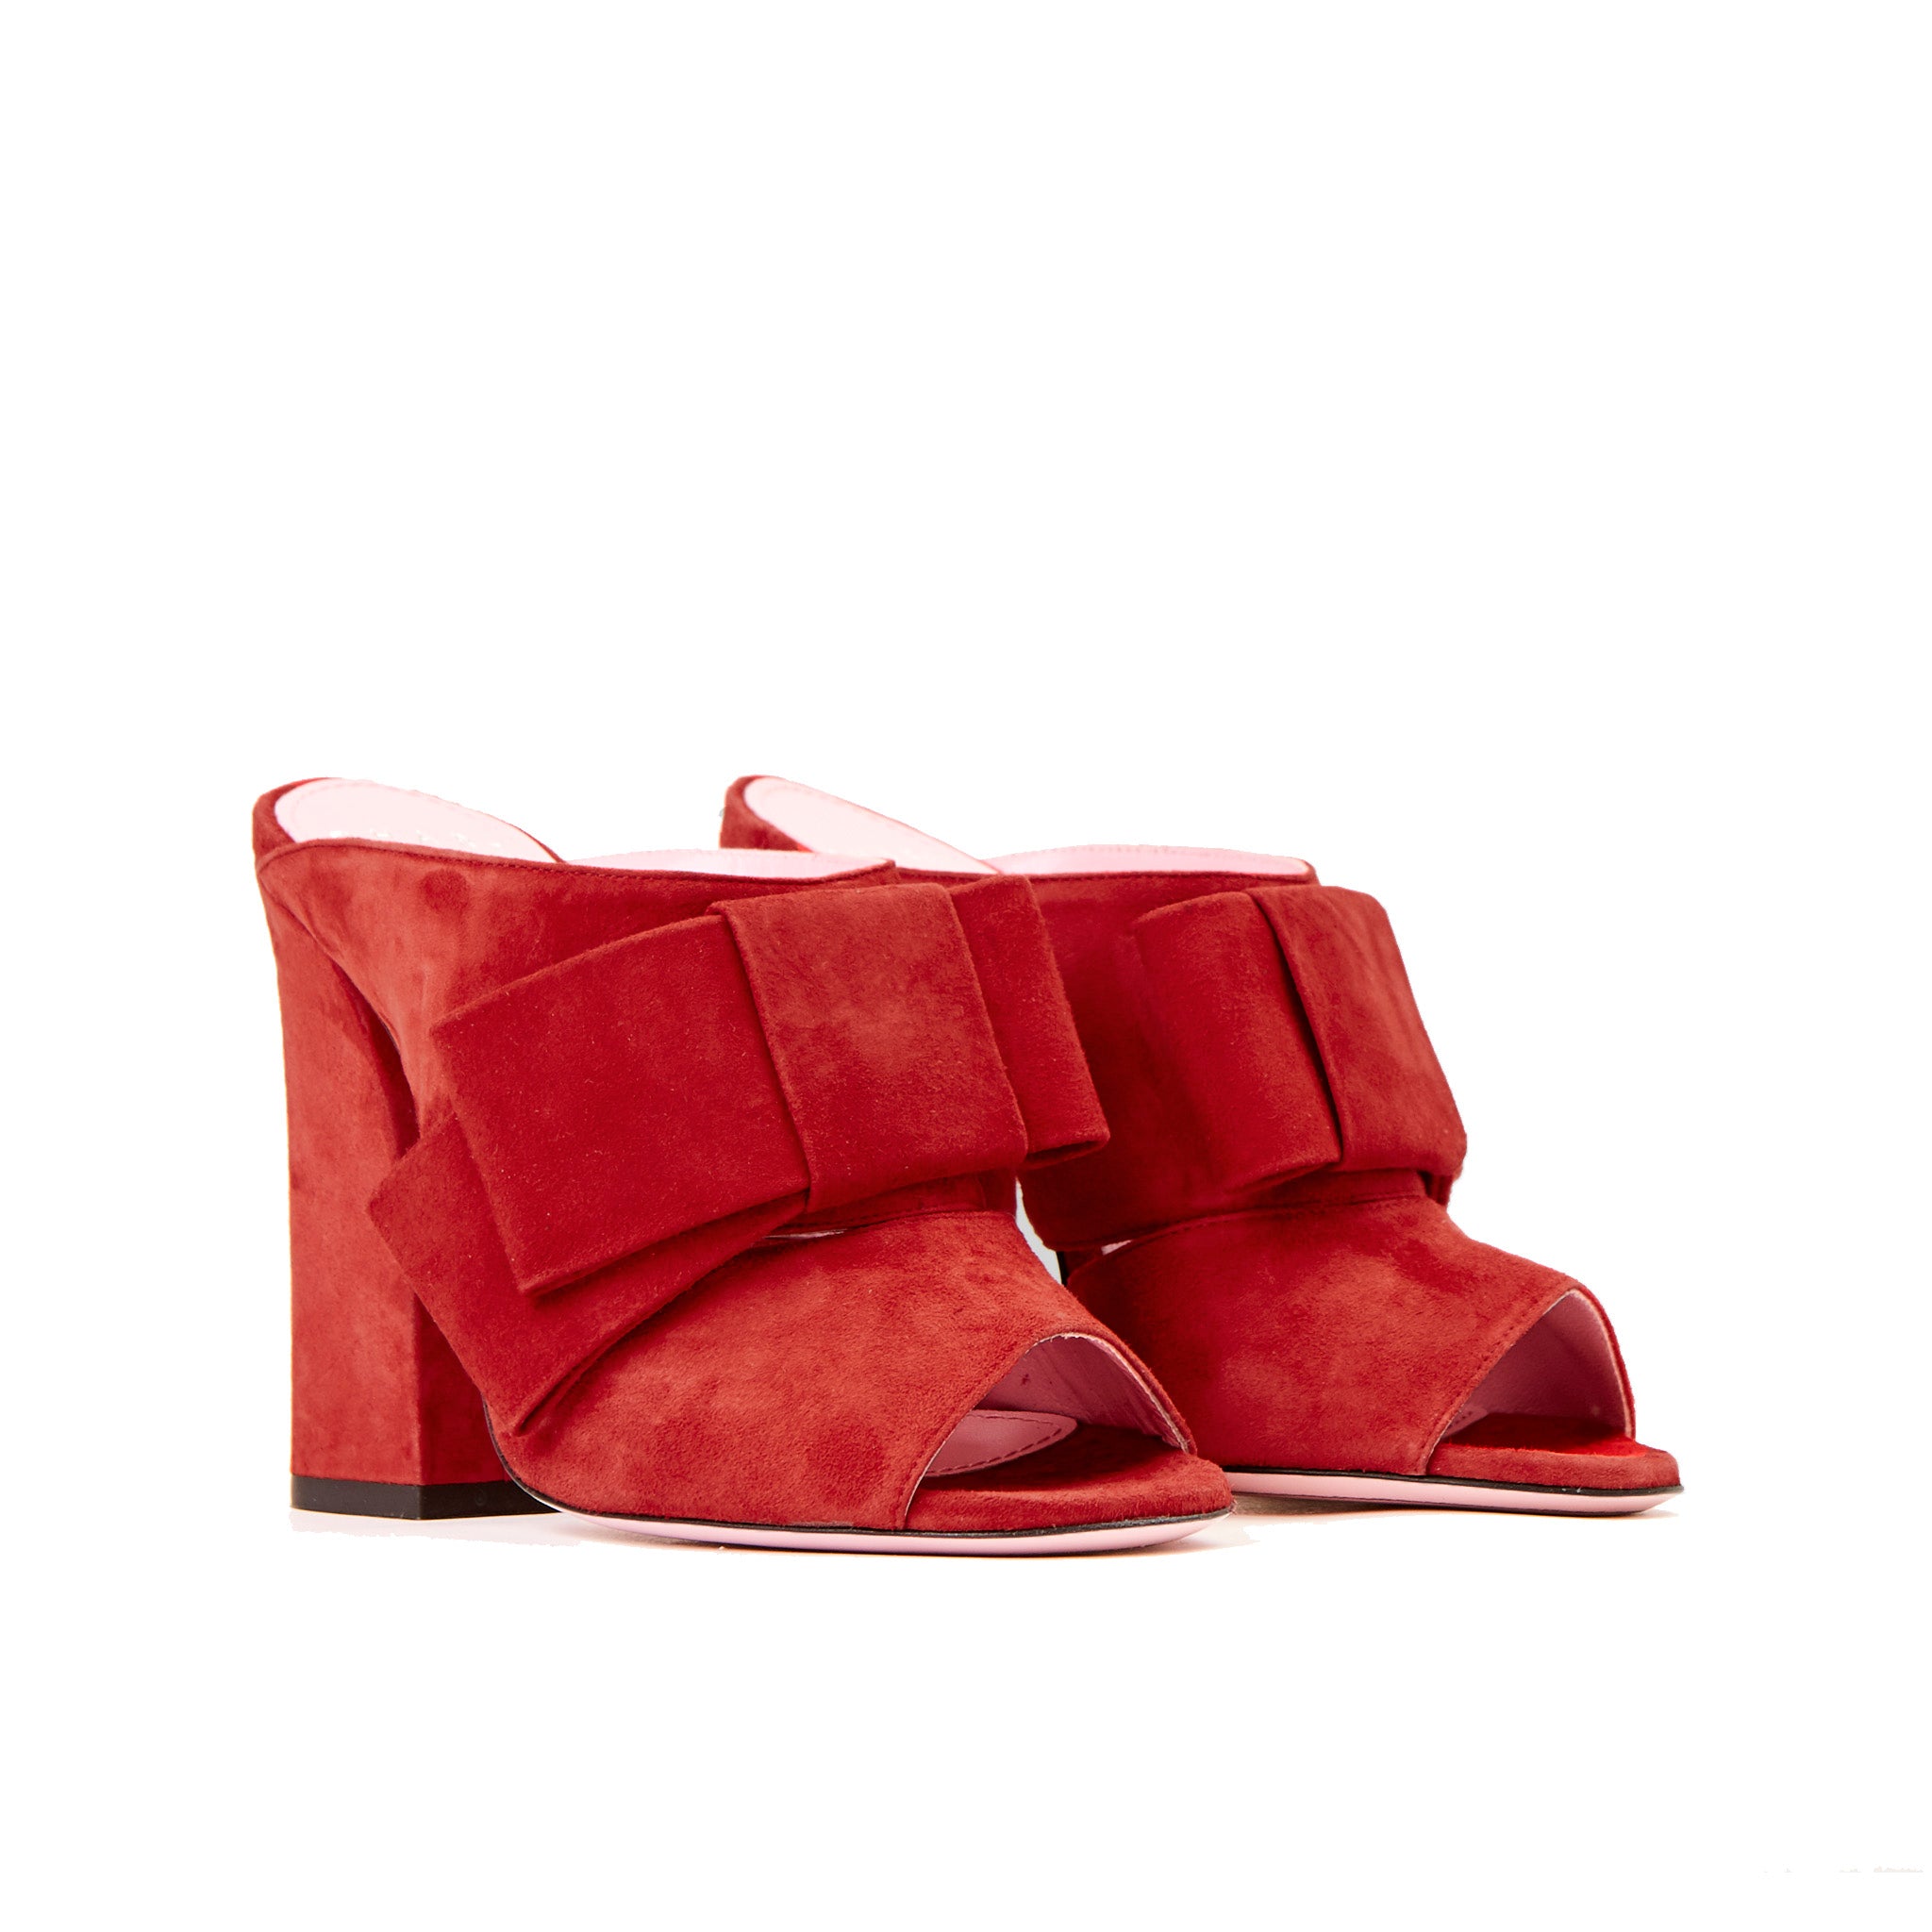 Phare High heel block heel mule with bow in rosso suede 3/4 view